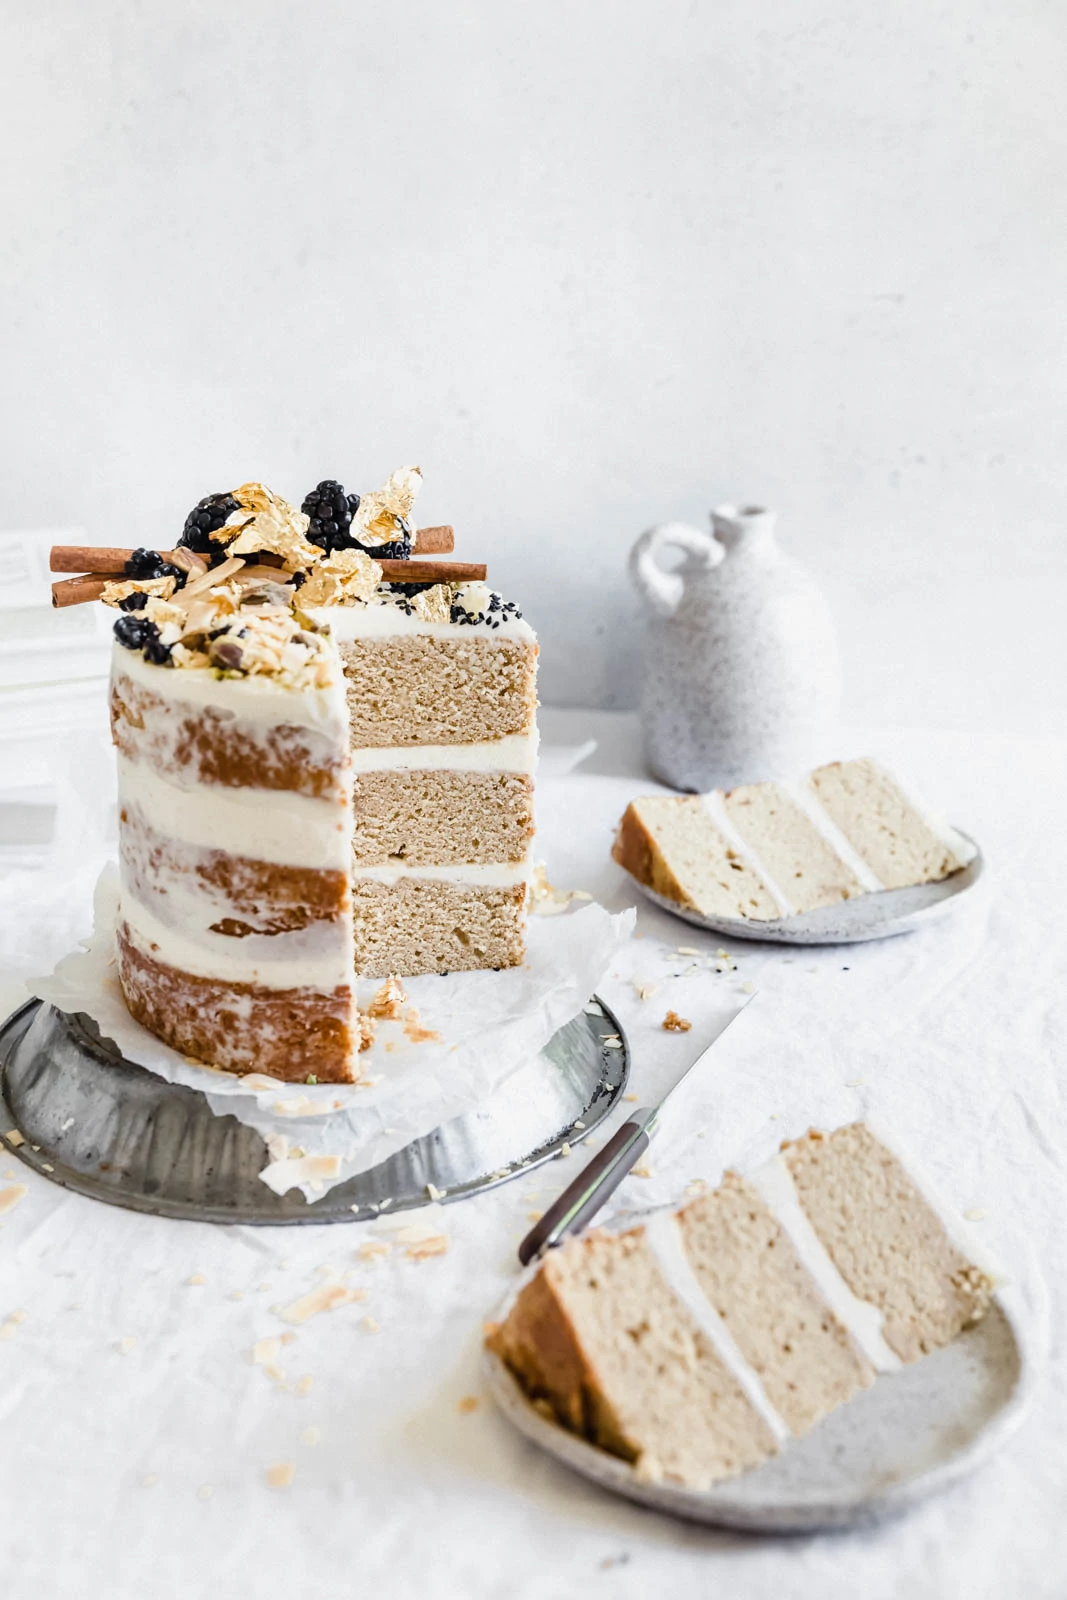 Like chai tea in a cake, this Chai Spice Cake with Vanilla Cream Cheese Frosting is delicately spiced with cinnamon, cardamom, and ginger. YUMMA.